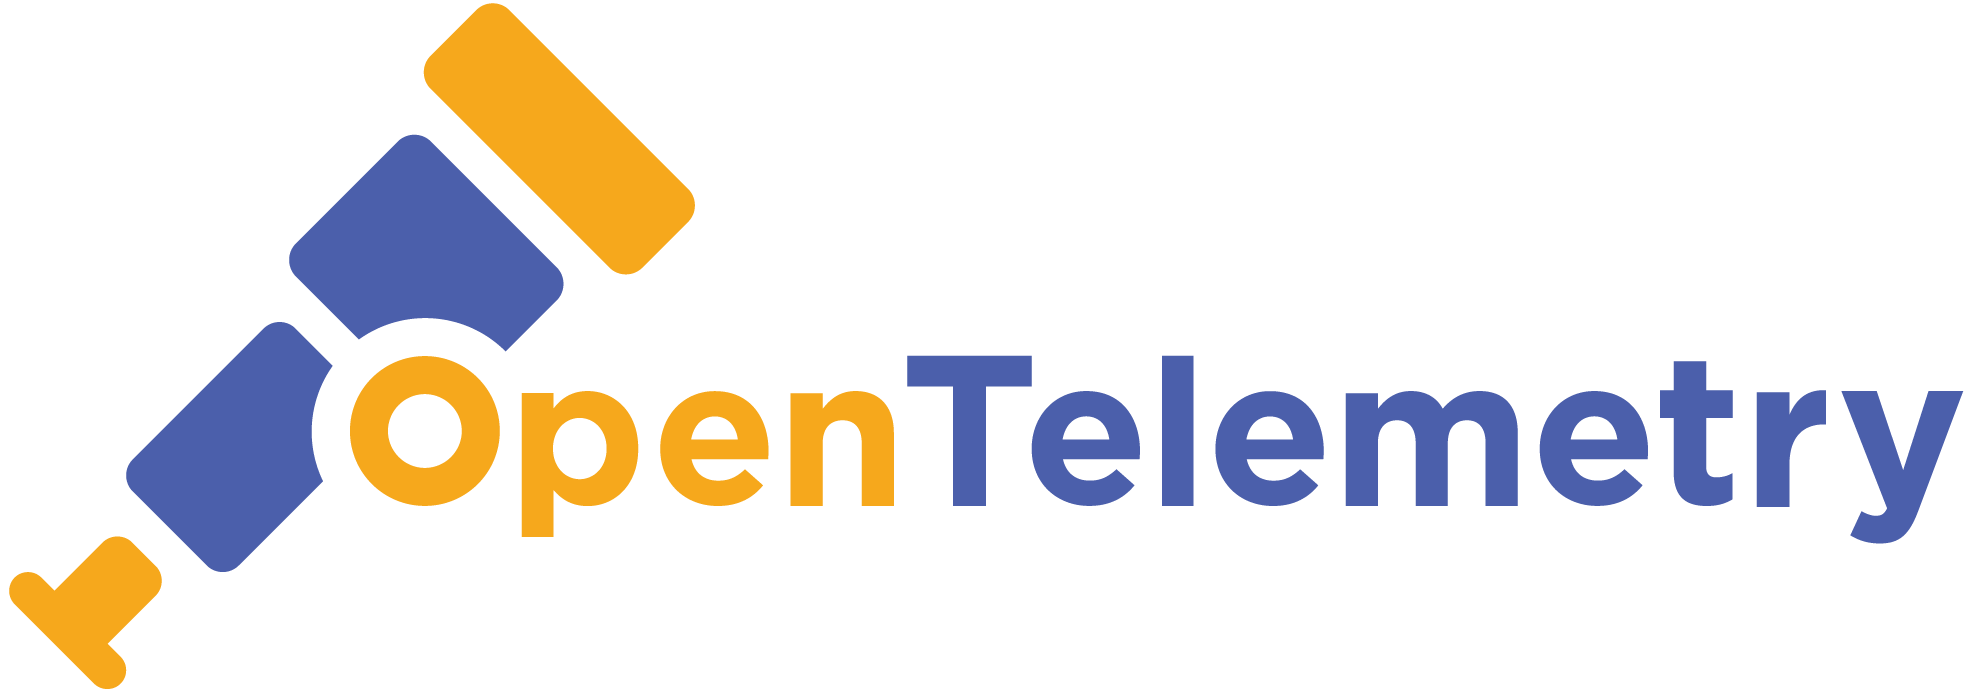 opentelemetry-horizontal-color.png